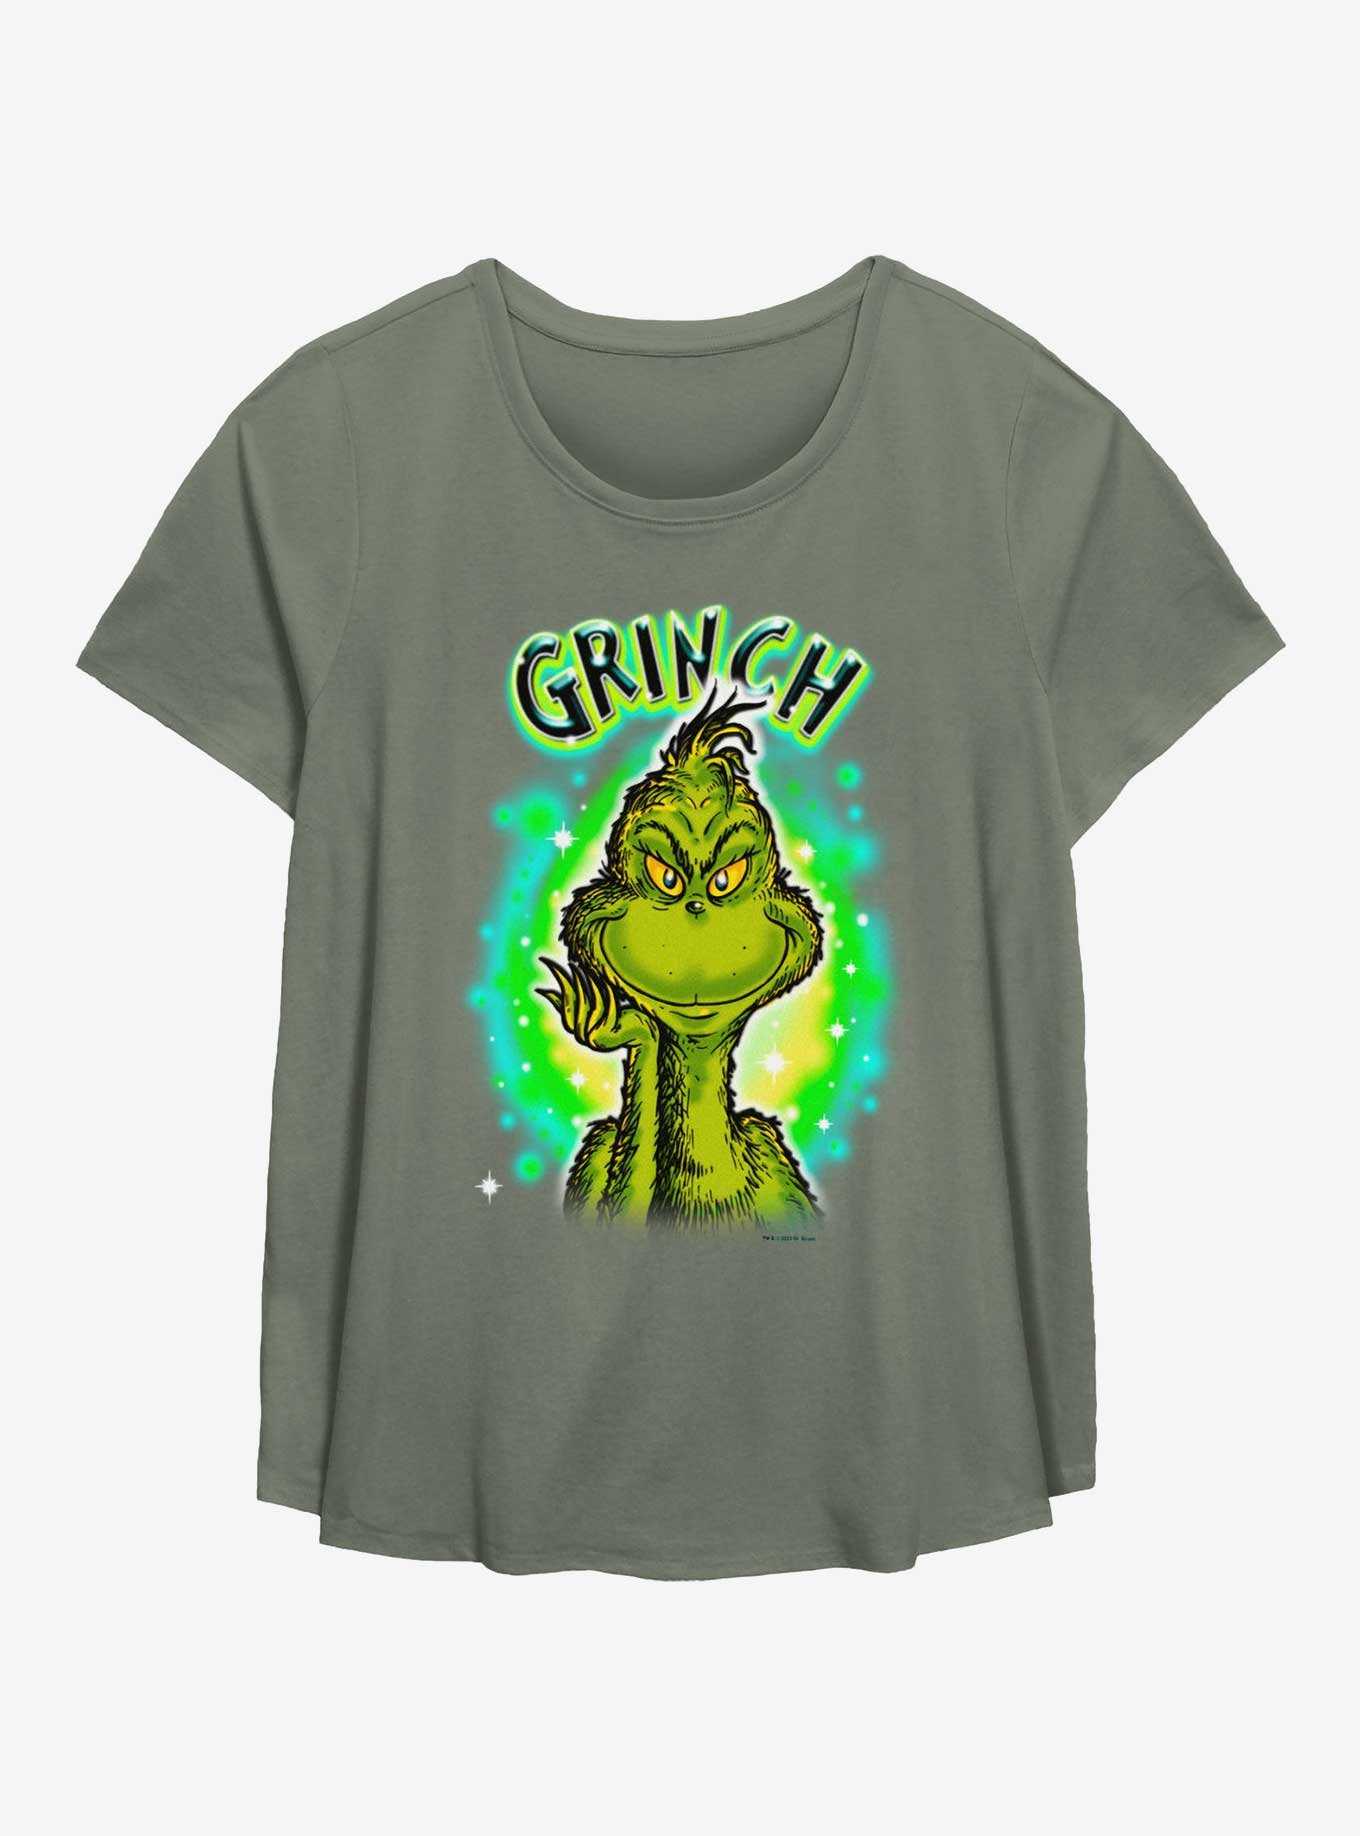 Dr. Seuss How The Grinch Stole Christmas Green Grinch Girls T-Shirt Plus Size, , hi-res